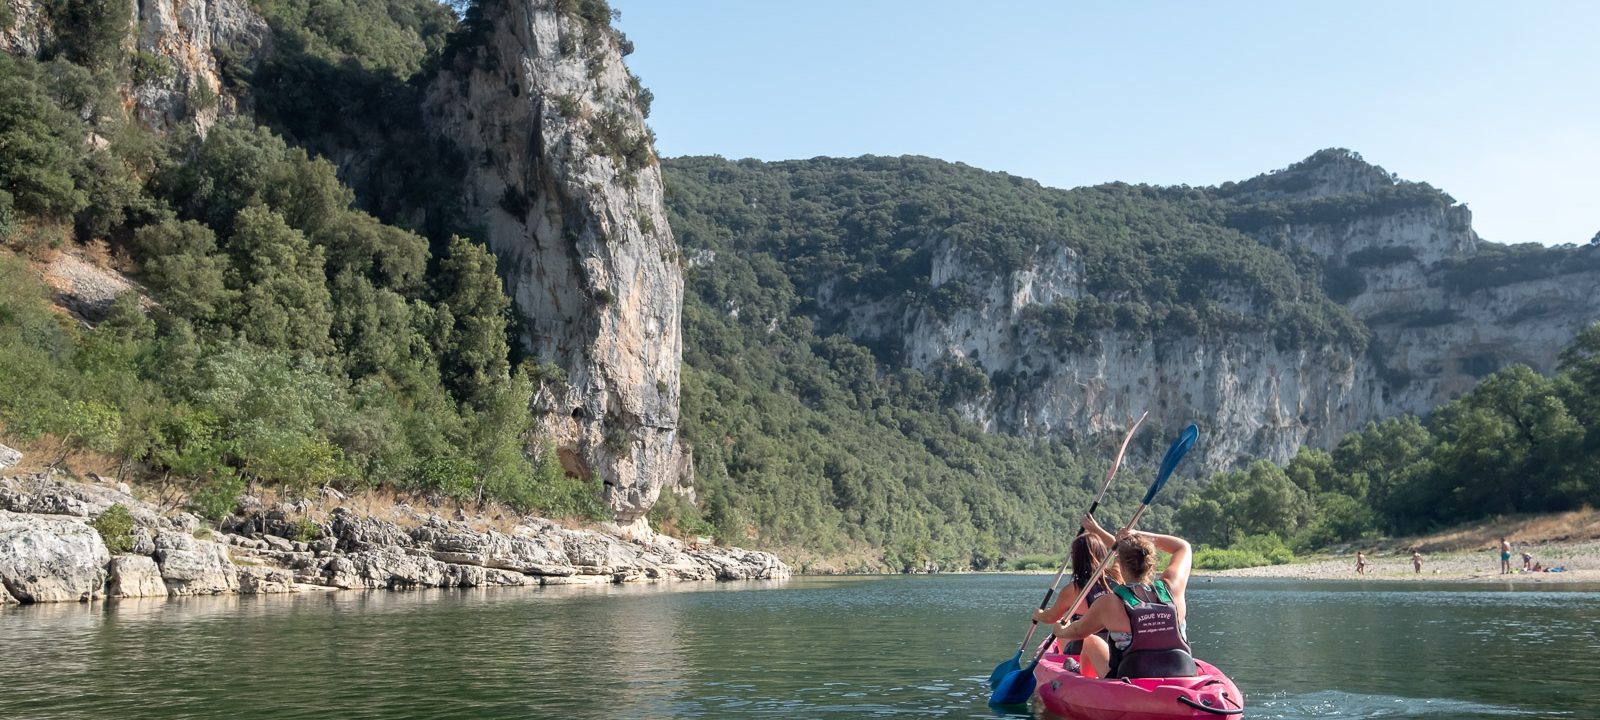 Canoe - Kayak from Vallon to St Martin d'Ardèche - 32 km / 2 days with Aigue Vive